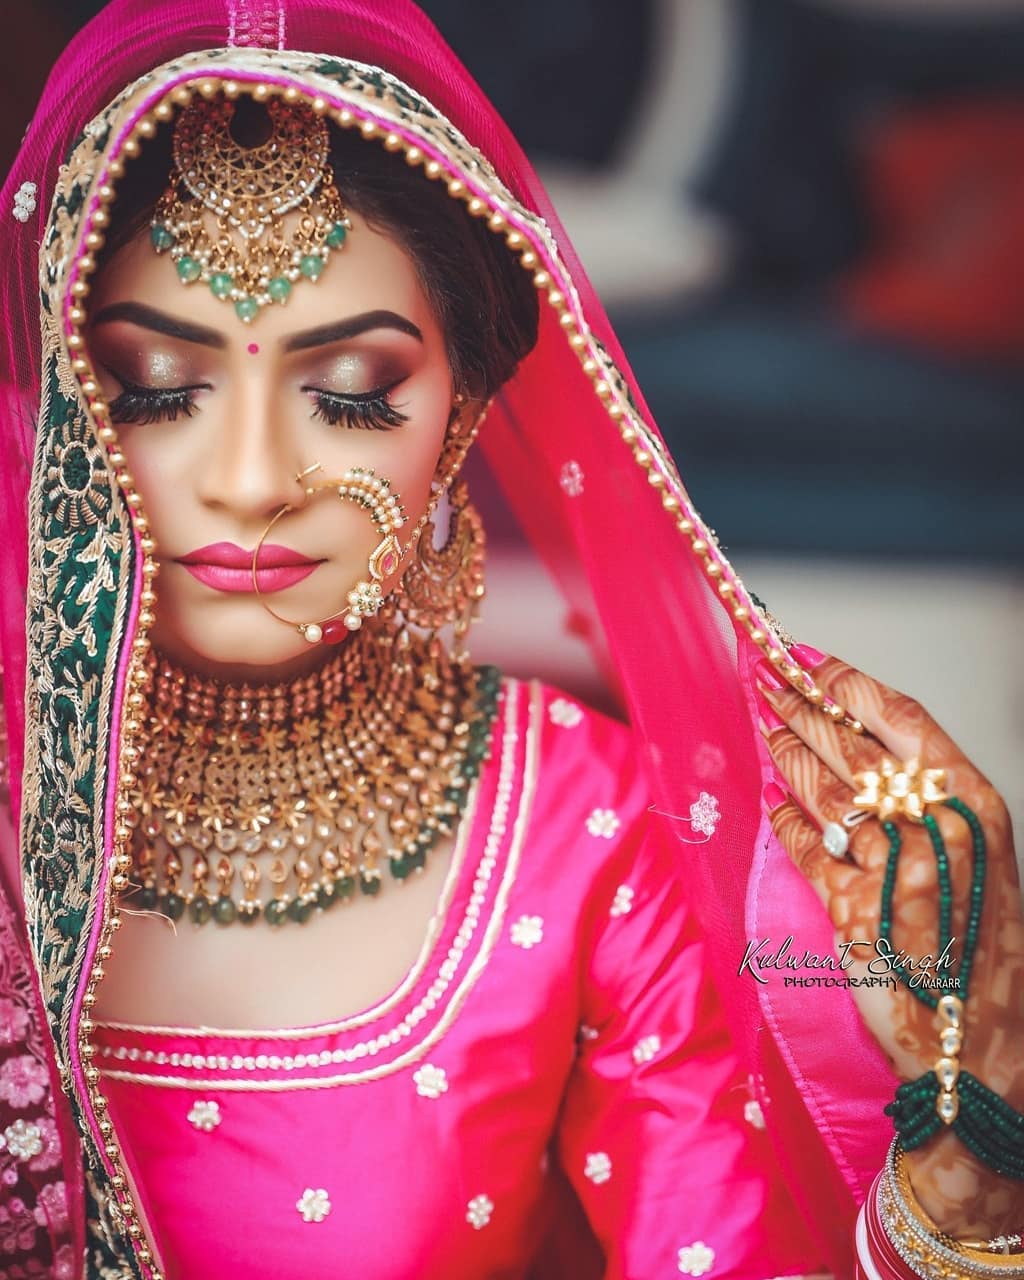 Indian Makeup and Jewelry Ideas Inspired from Real Brides